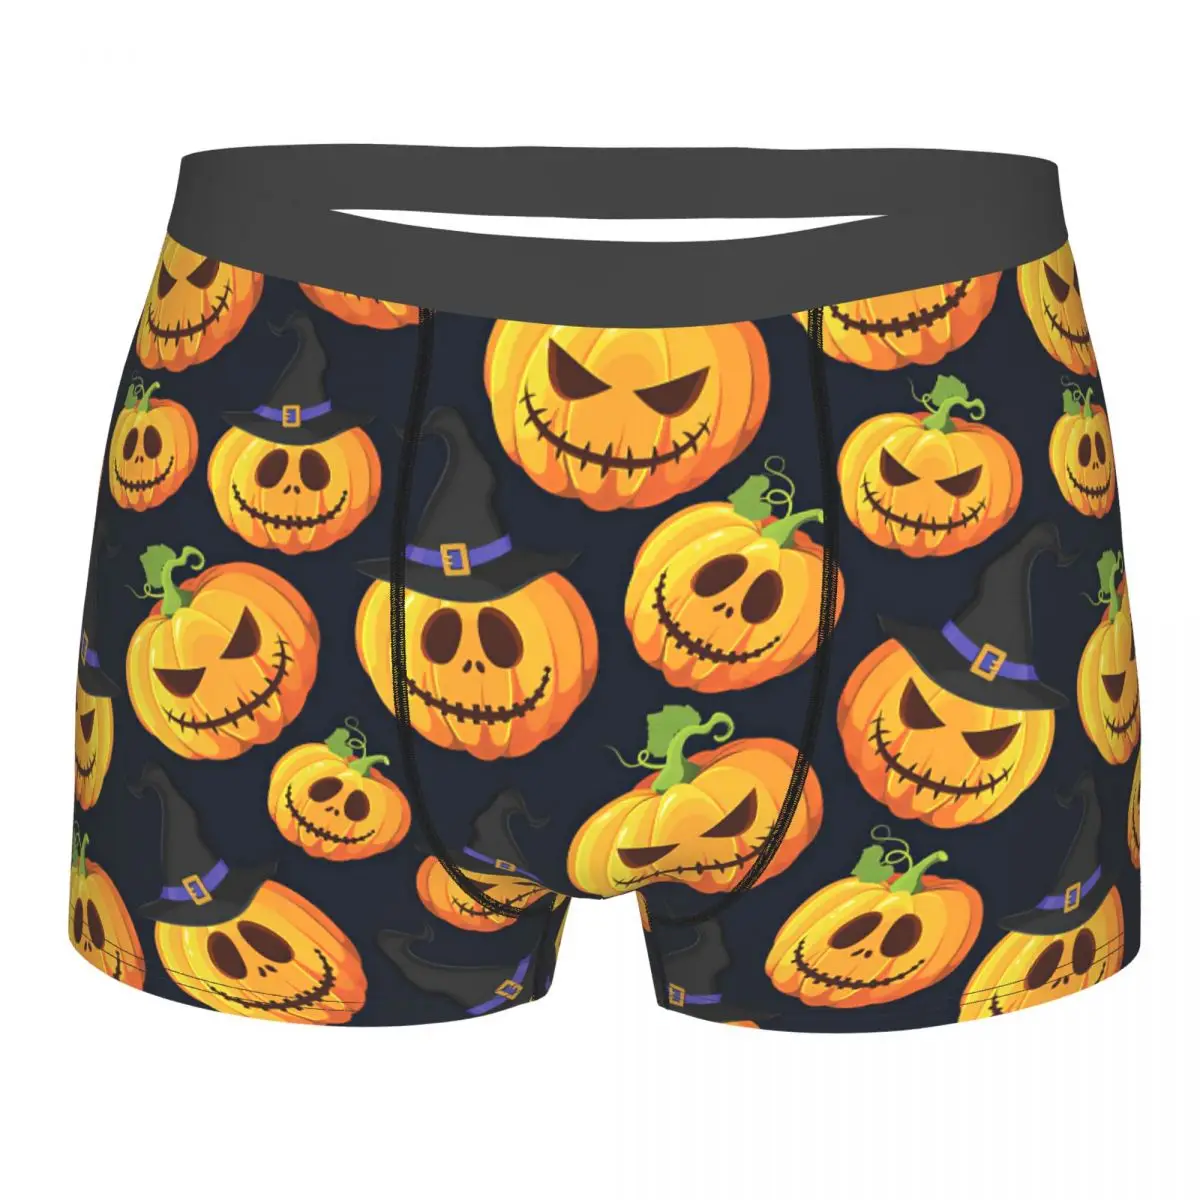 Halloween Pumpkin On Black Background With Witch Hat Underpants Breathbale Panties Male Underwear Print Shorts Boxer Briefs